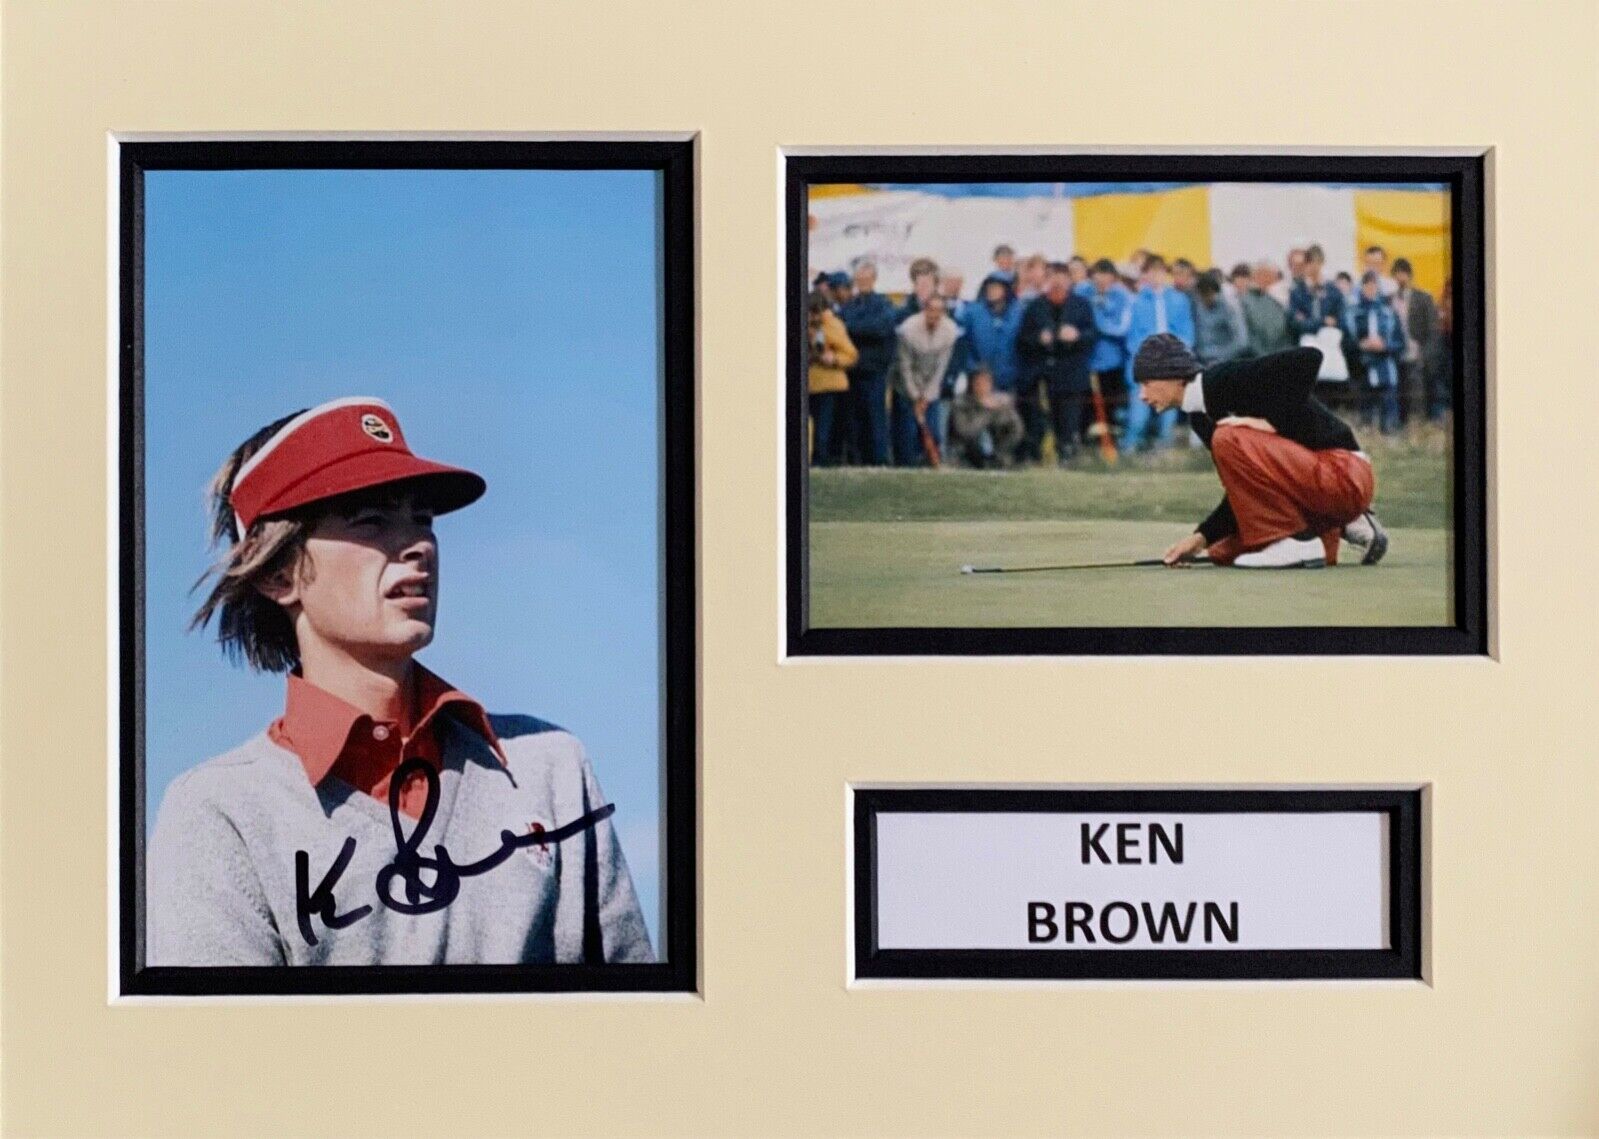 KEN BROWN HAND SIGNED A4 Photo Poster painting MOUNT DISPLAY GOLF AUTOGRAPH 4